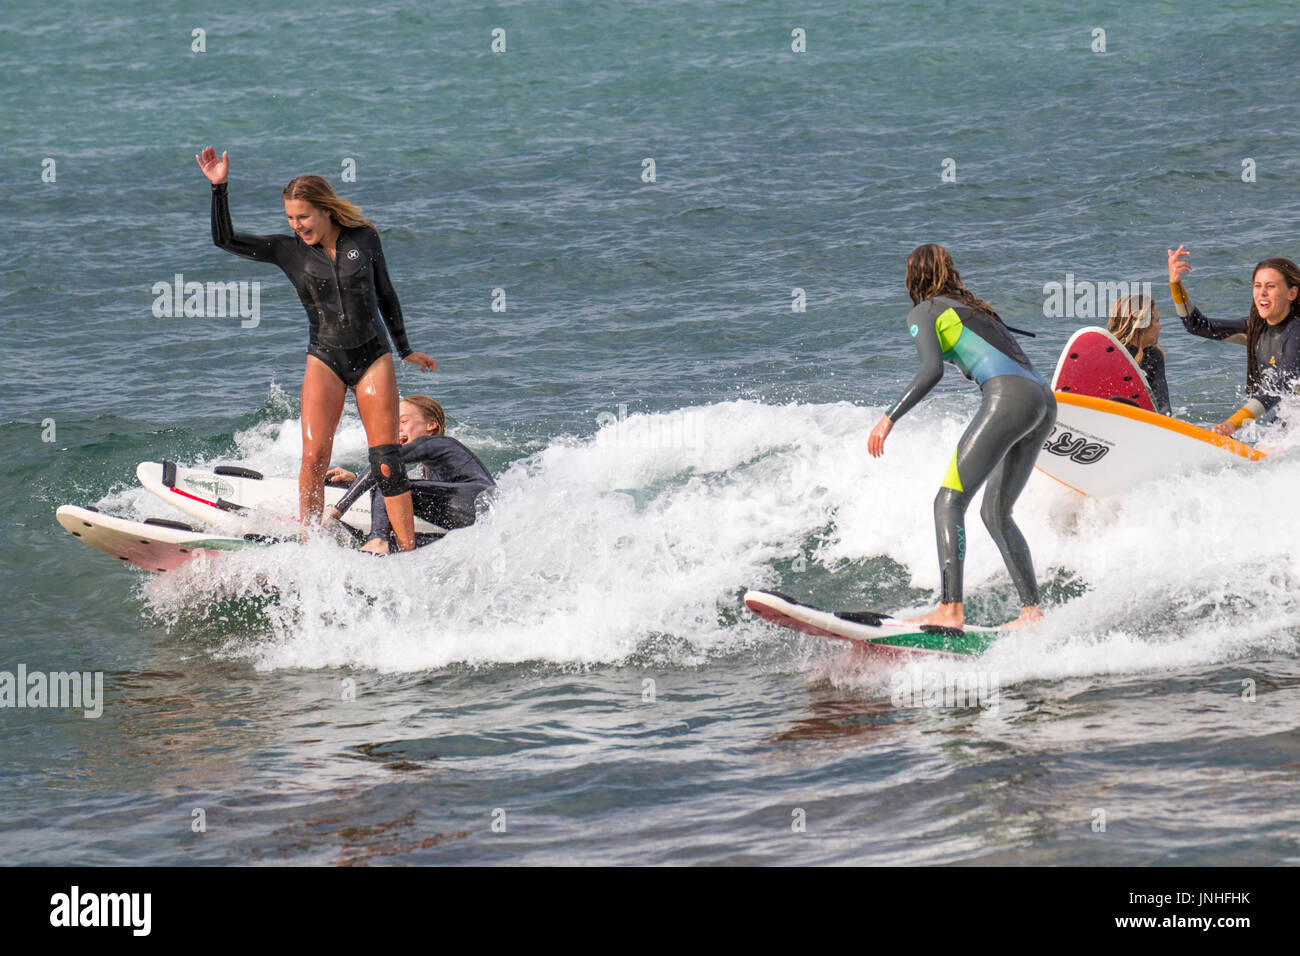 Australian surfer, girls close up young women surfing on surfboards at Avalon beach in Sydney,Australia Photo - Alamy